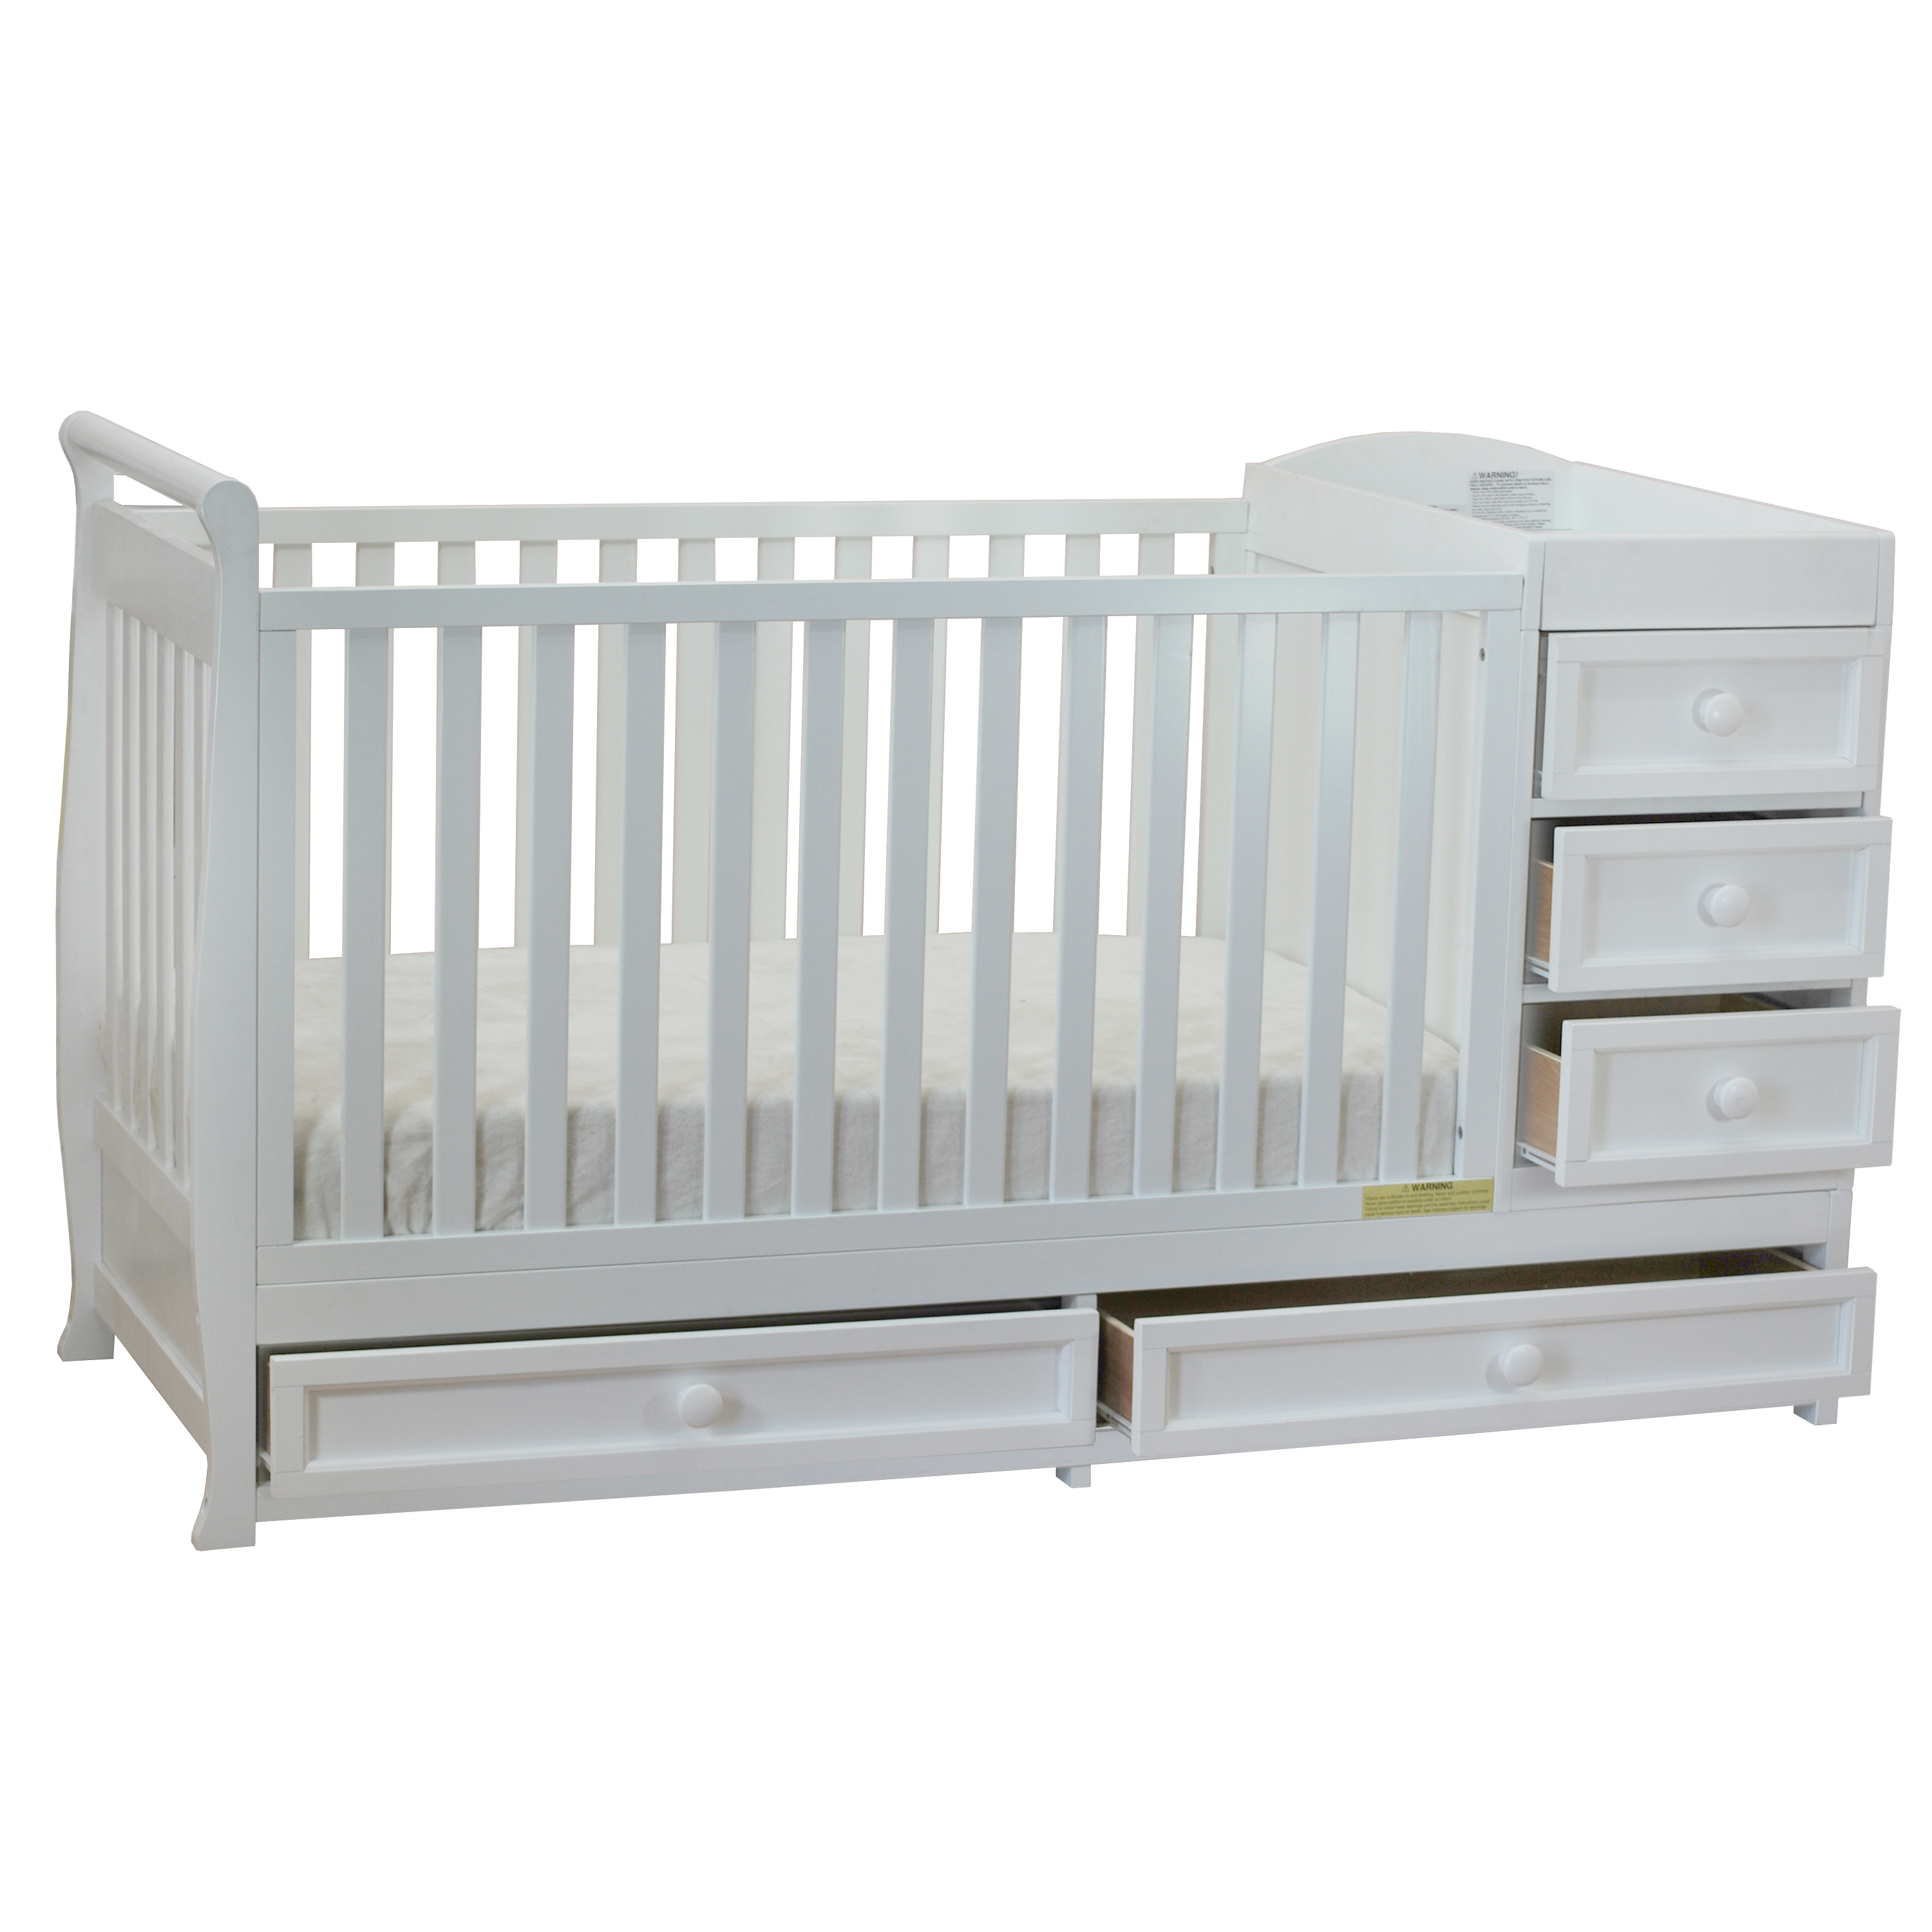 AFG Baby Furniture Daphne 2-in-1 Convertible Crib and Changer White - image 3 of 6